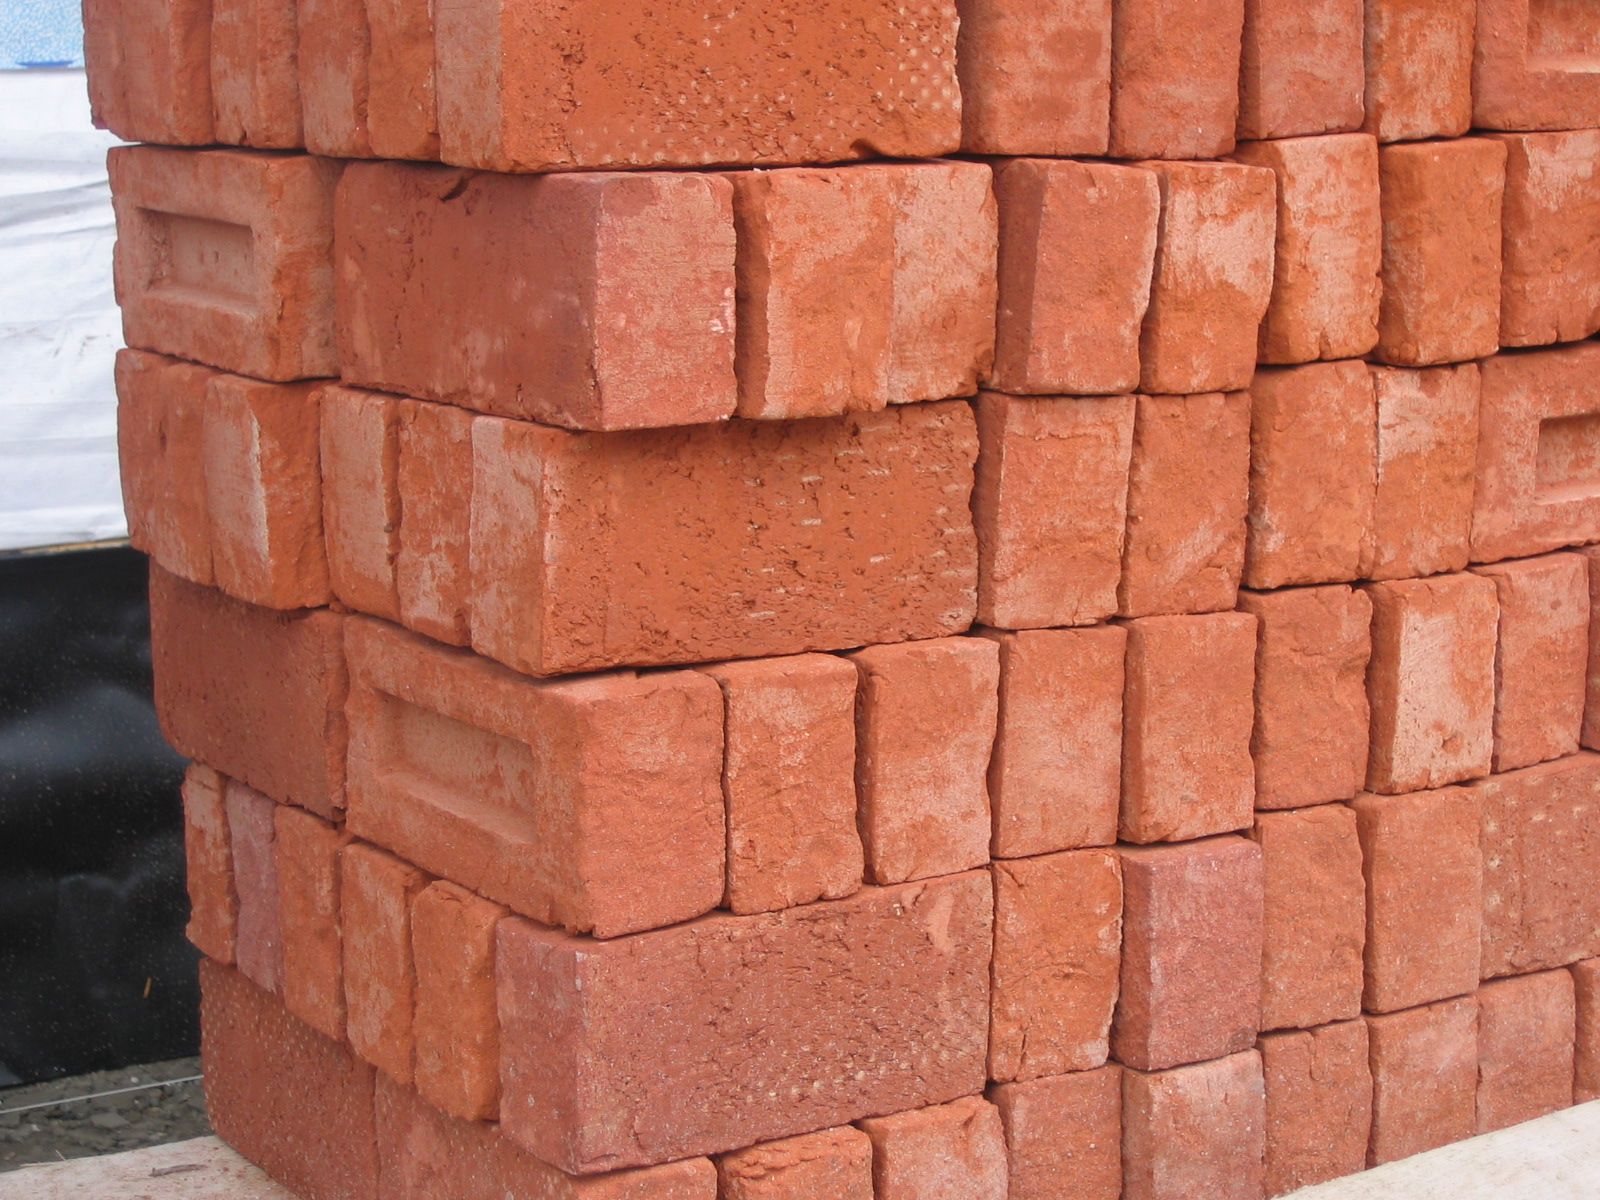 Housing shortage nothing to do with brick levels, say brickmakers